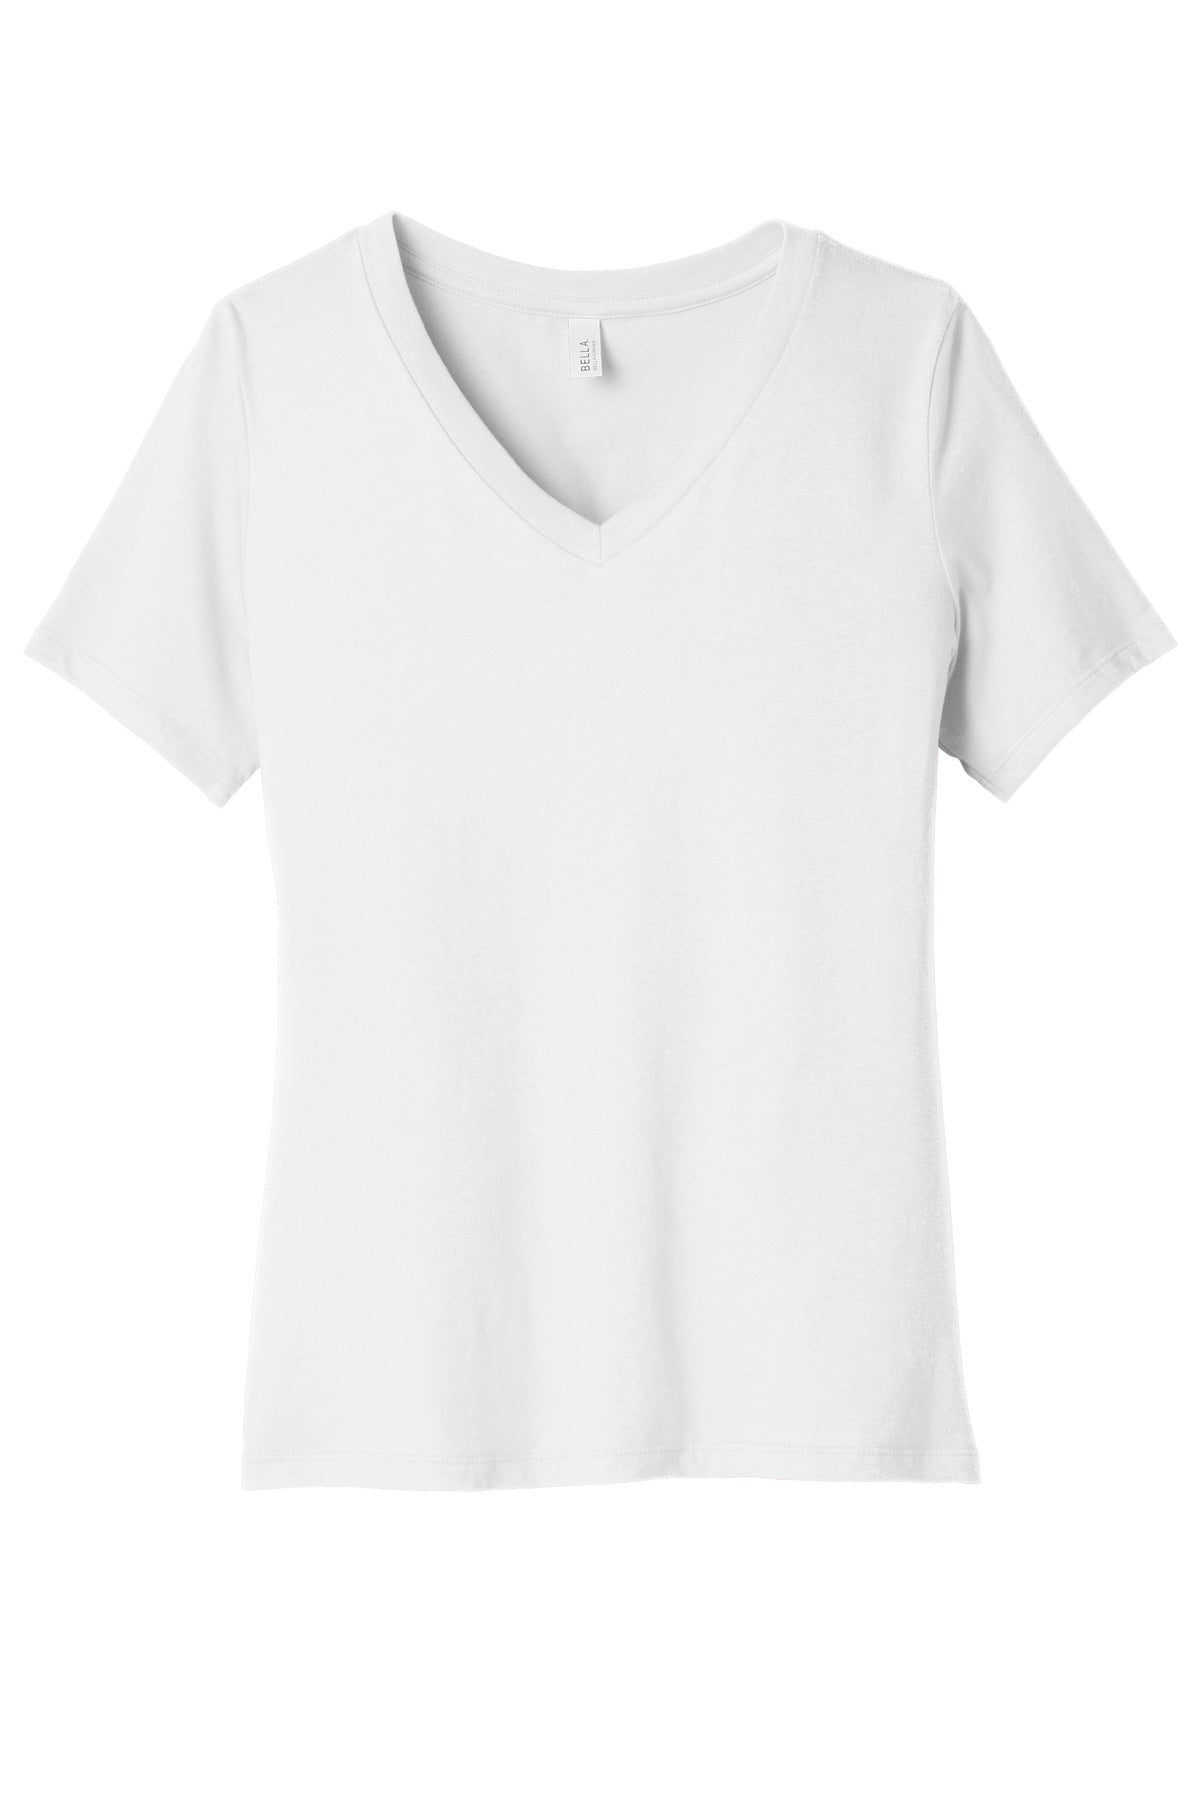 BELLA+CANVAS Women's Relaxed Jersey Short Sleeve V-Neck Tee. BC6405